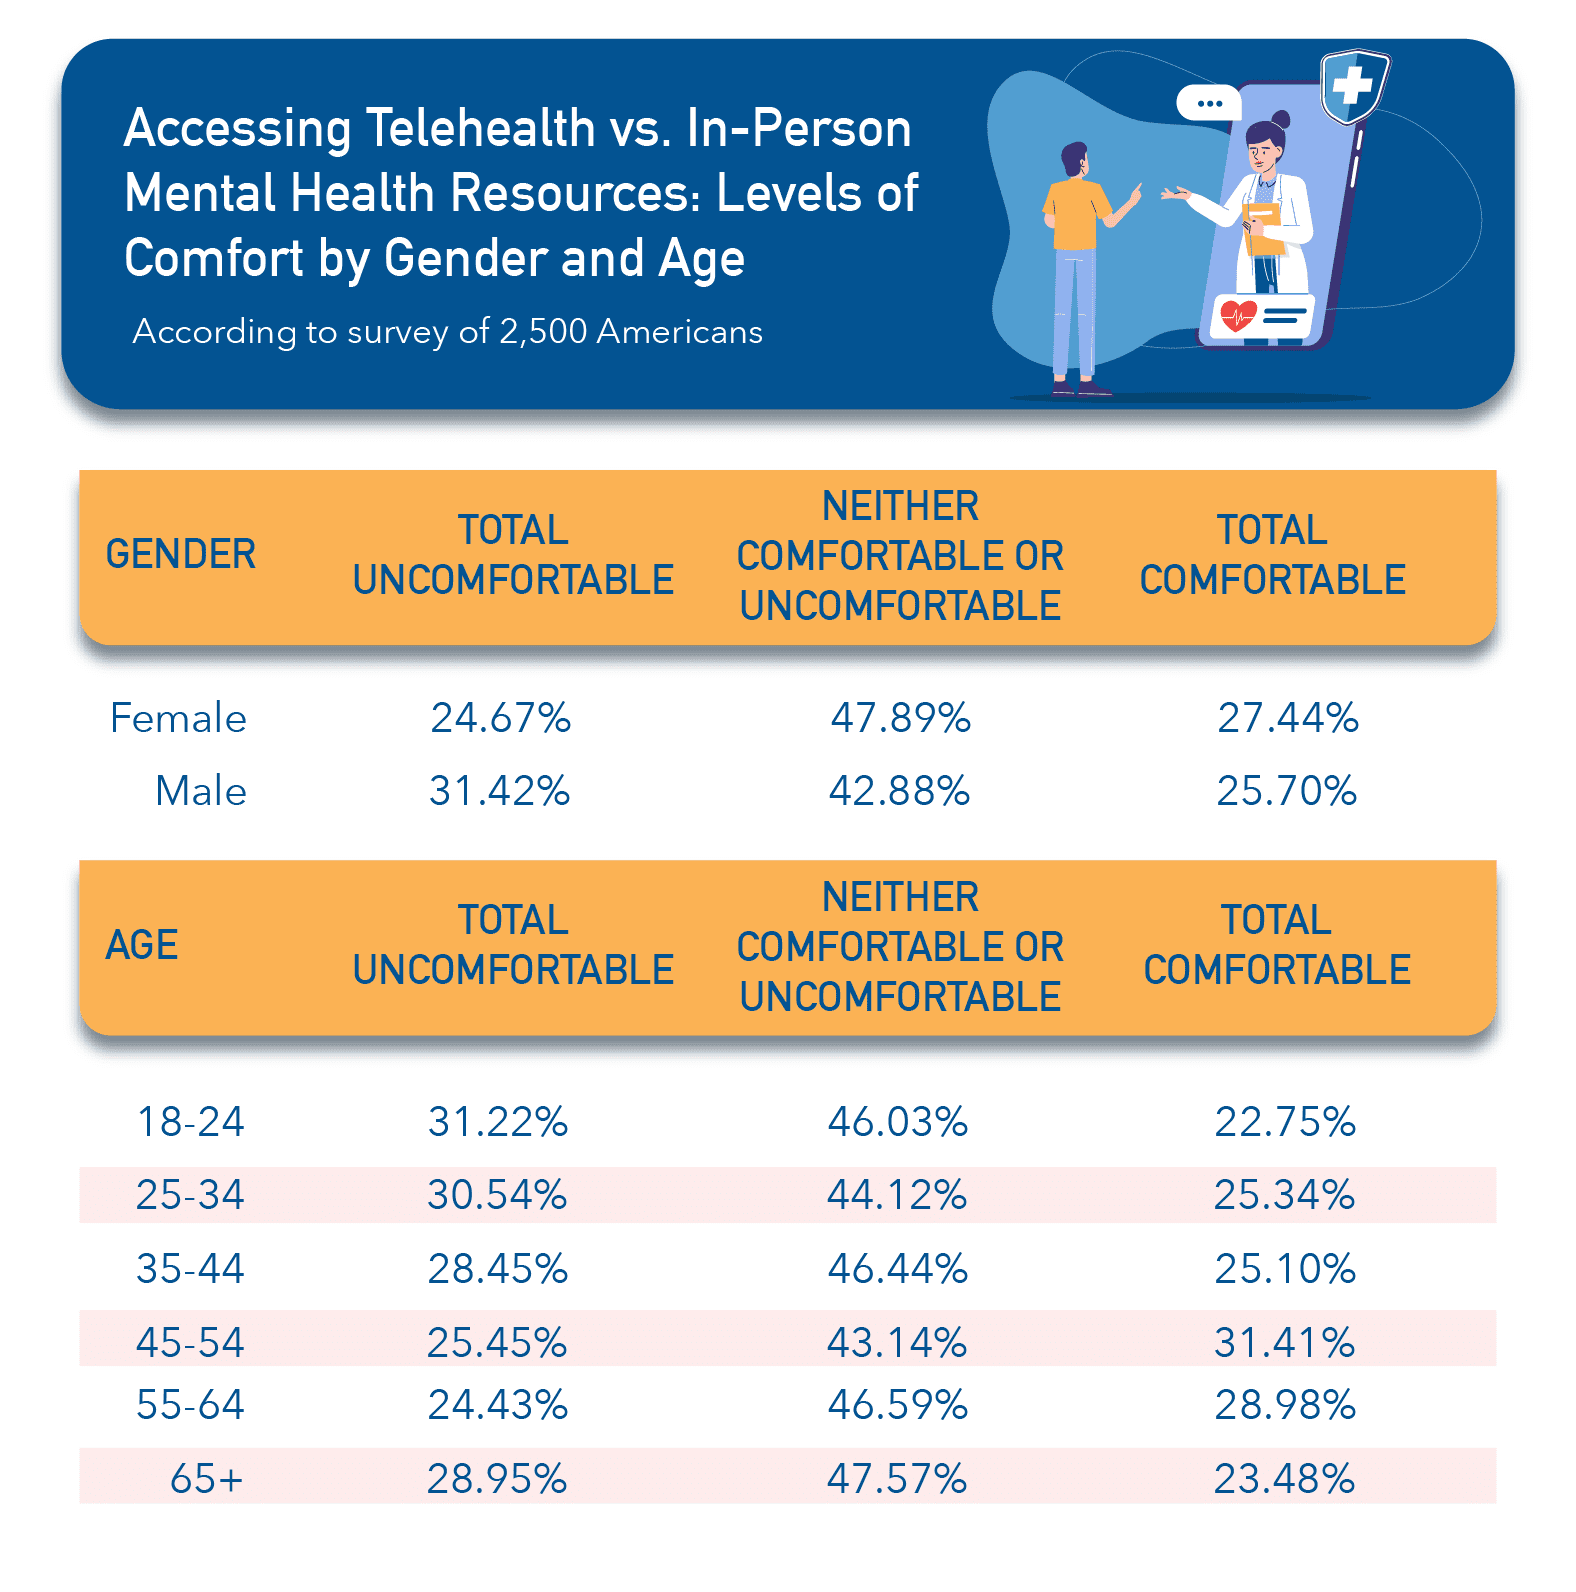 Table chart outlining levels of comfort accessing telehealth vs. in person mental health resources by gender and age